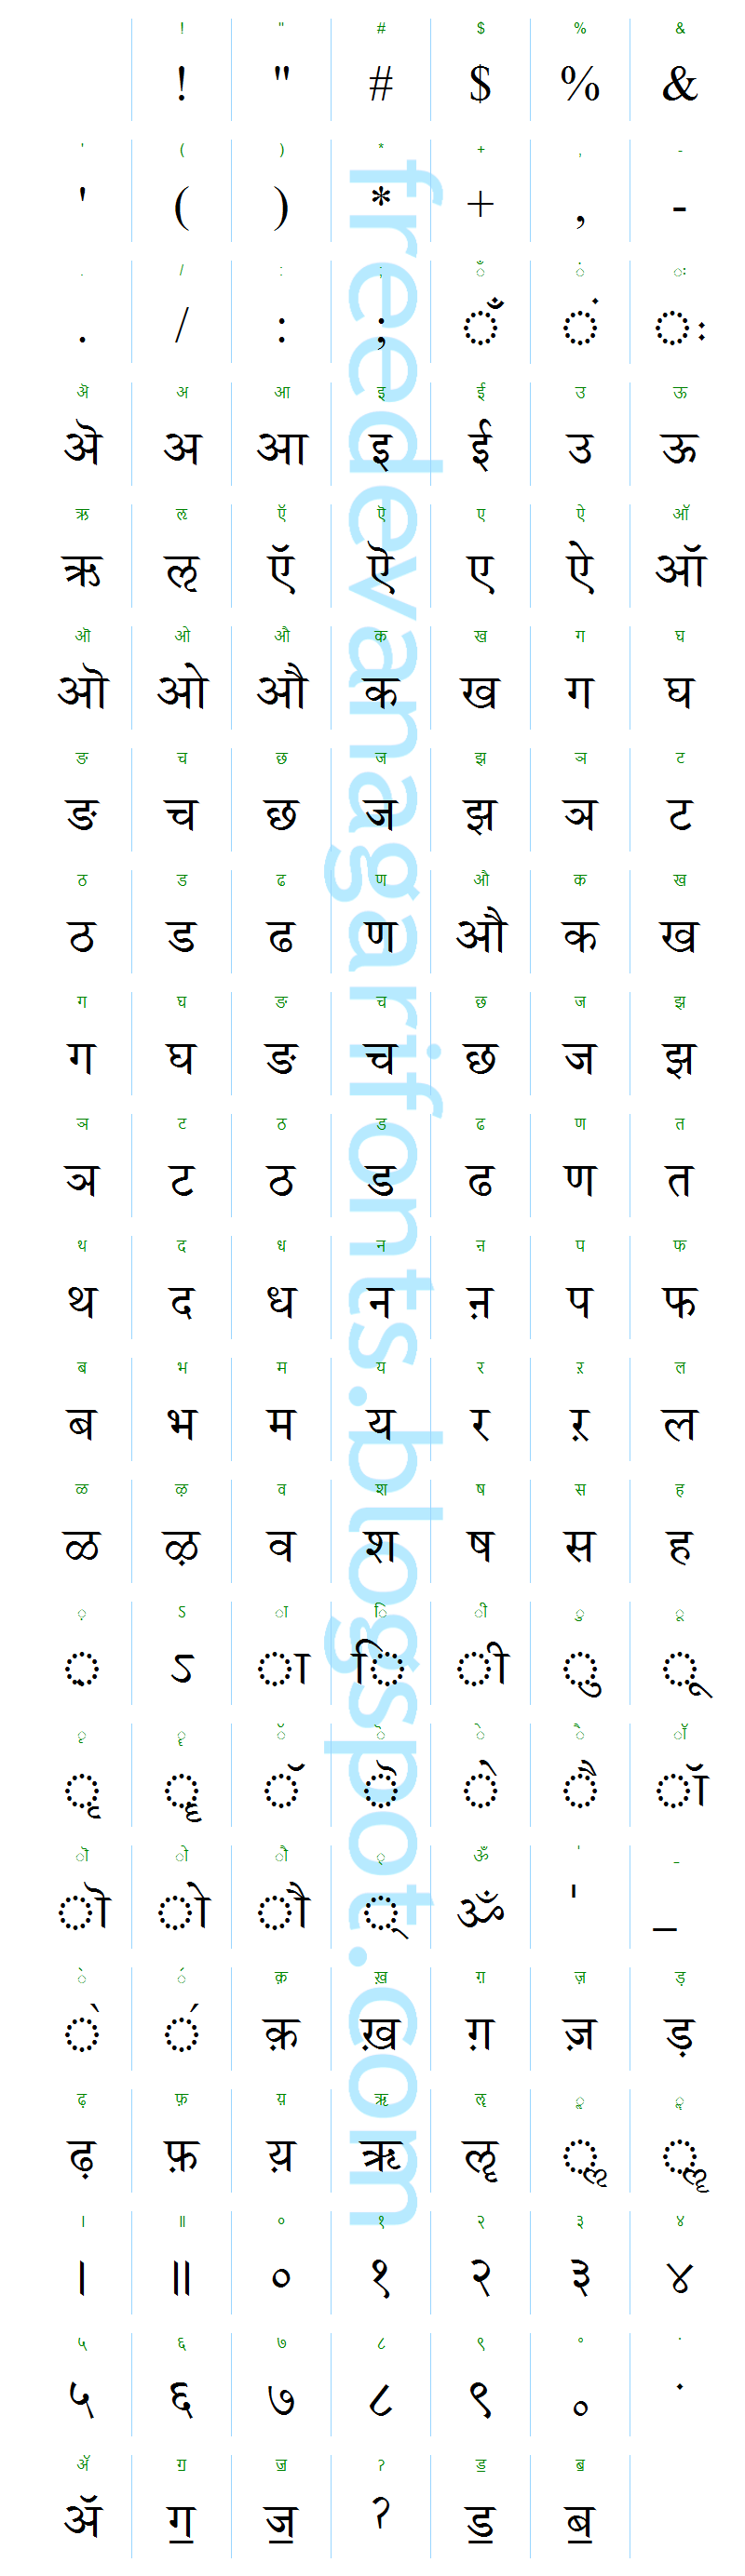 55 Nepali Fonts to Download - Free Nepali Font Collections